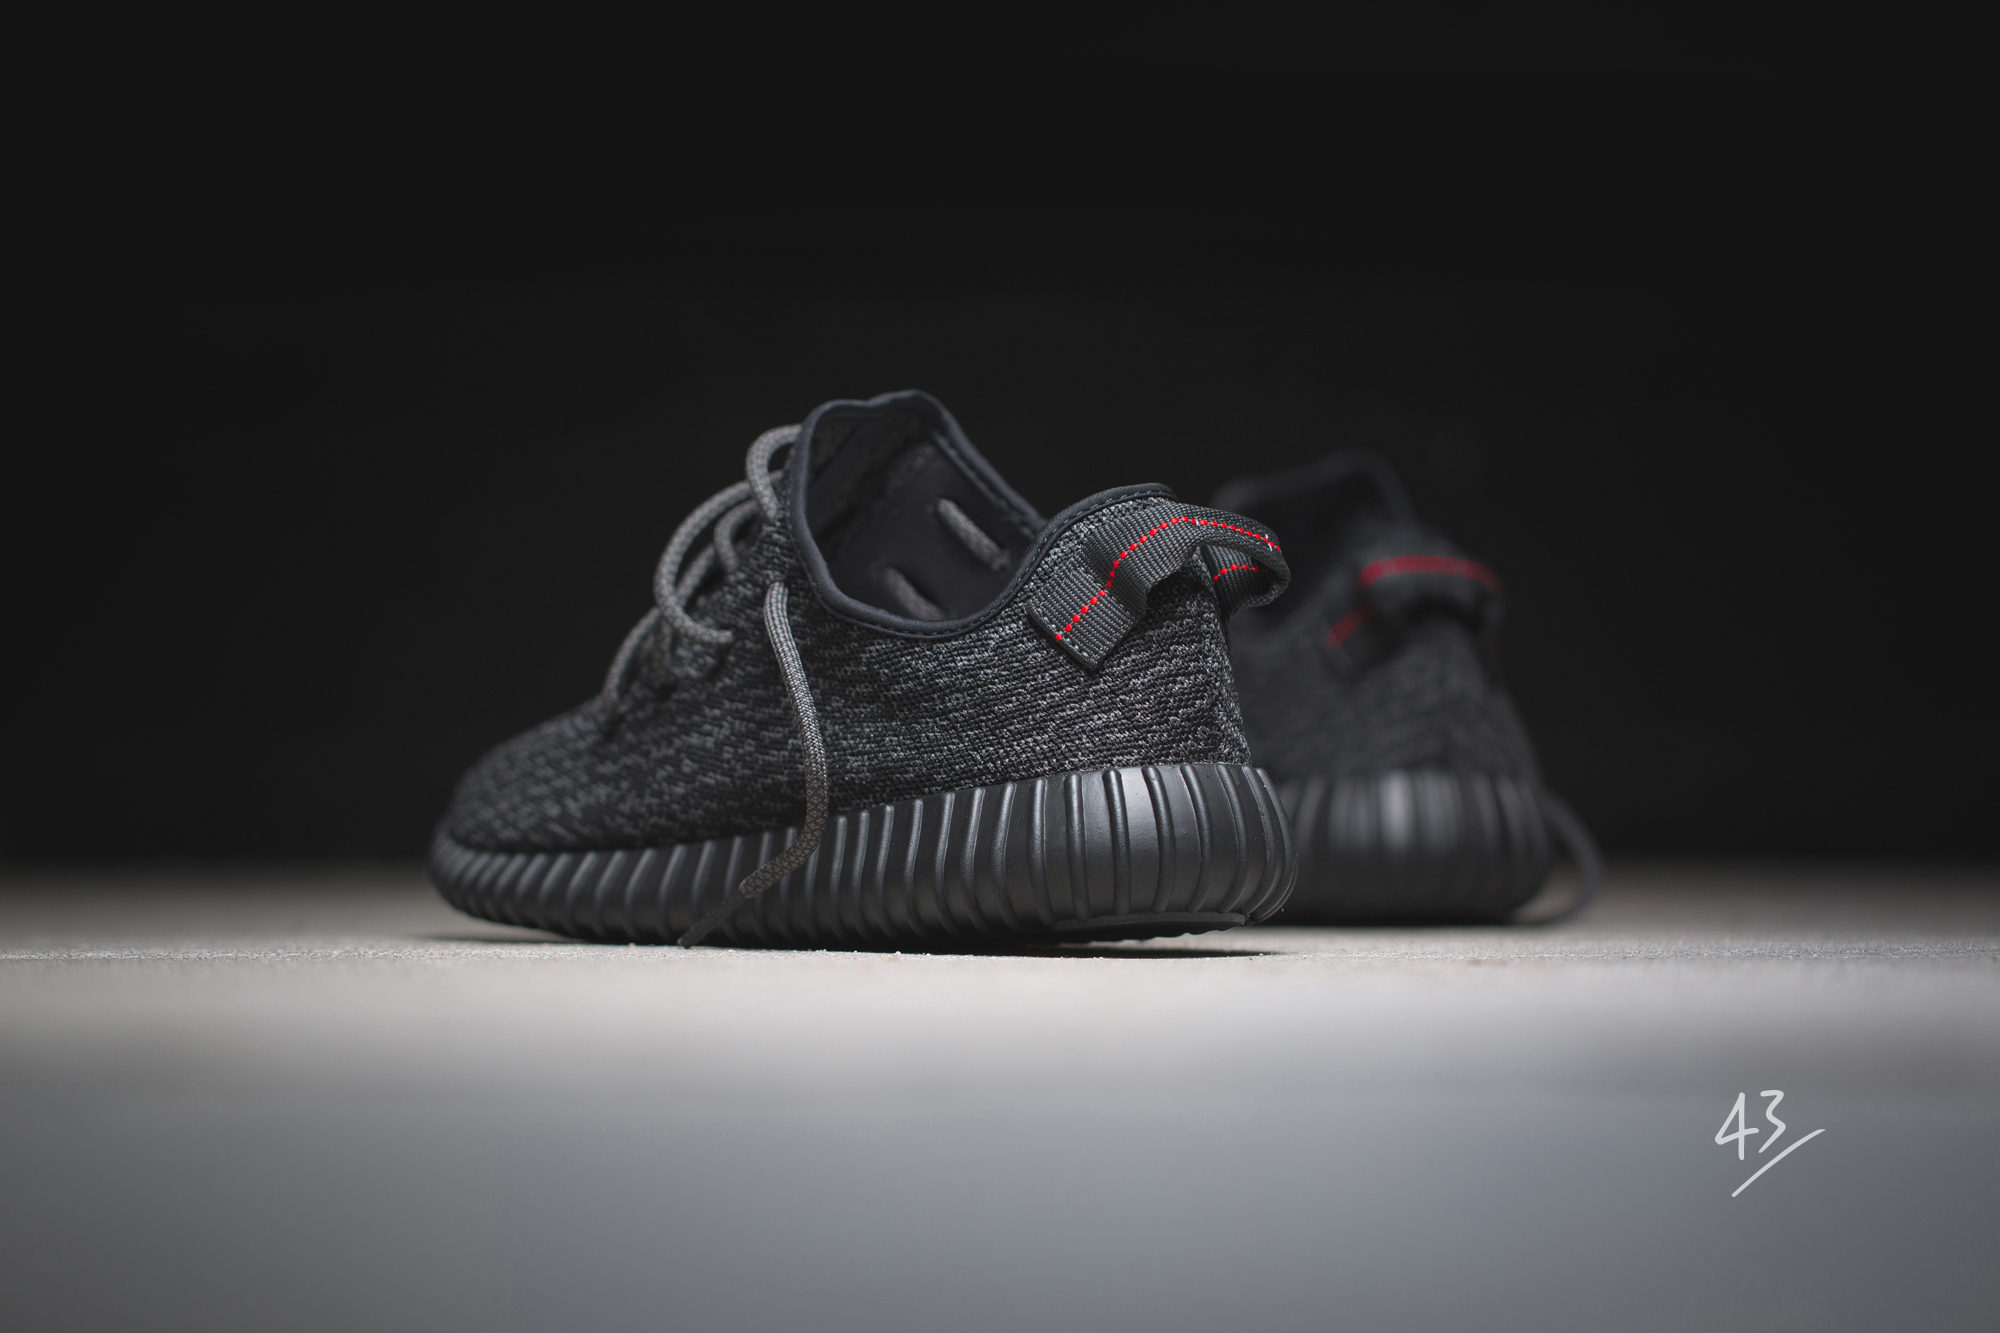 Adidas Yeezy Boost 350 V 2 Black Red BY 9612 Release Date